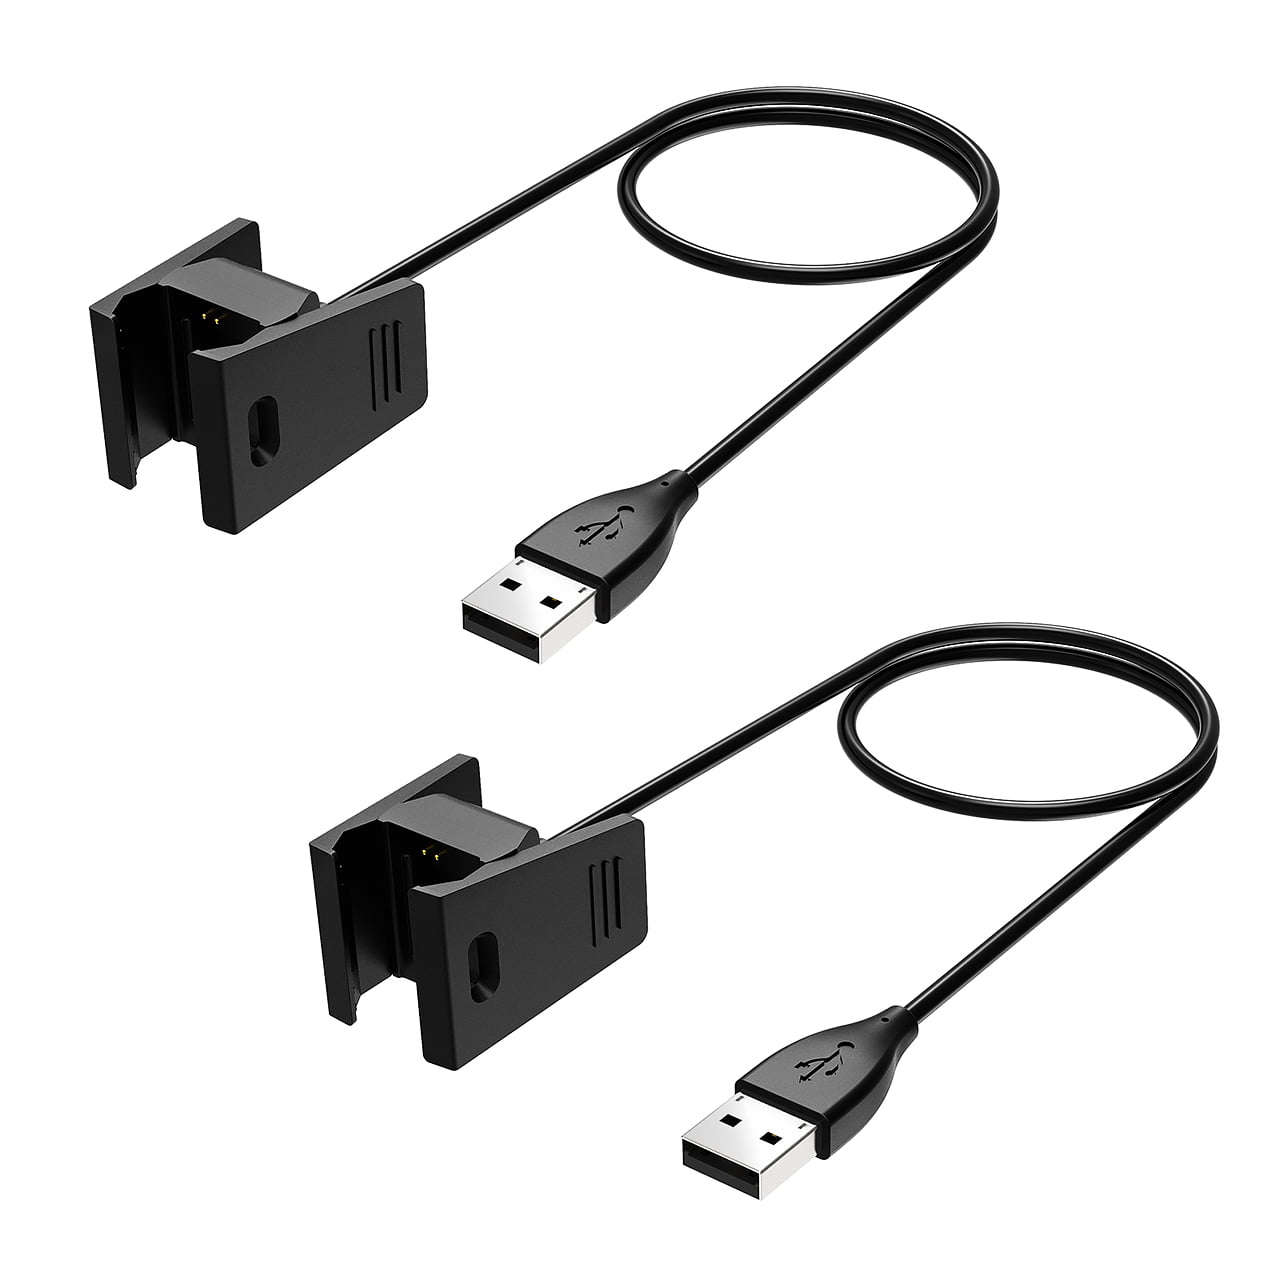 Awinner Charging Clip for Fitbit Charge 2,Replacement USB Charger Adapter Charge Cord Charging Cable for Fitbit Charge 2 Heart Rate 2-Pack 